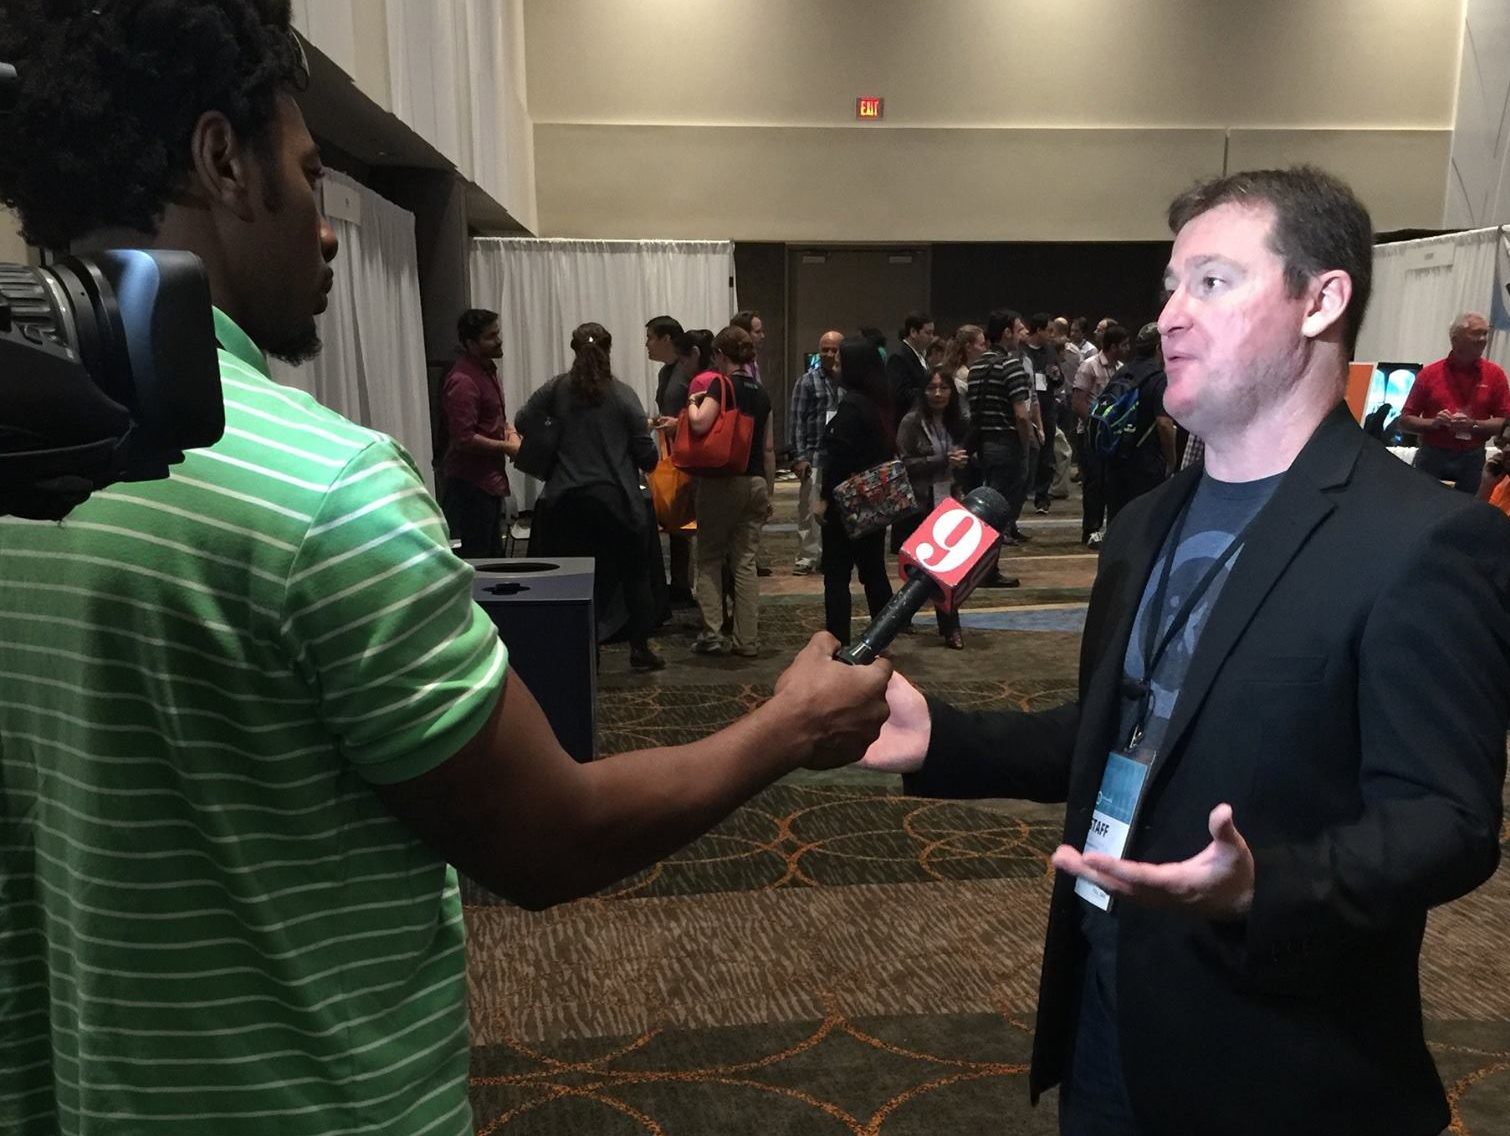 David C. Glass interview at OrlandoiX with Channel 9 in Orlando